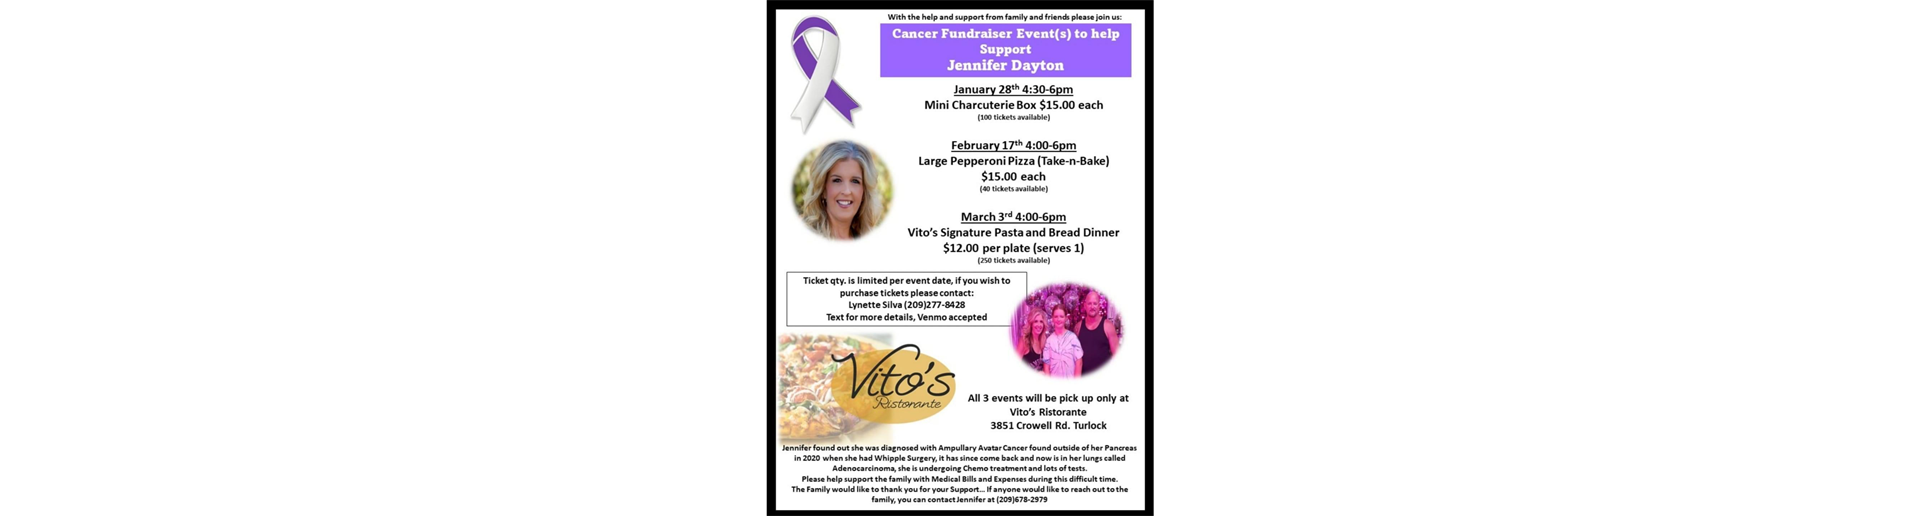 Cancer Fundraiser for one of our Softball Families